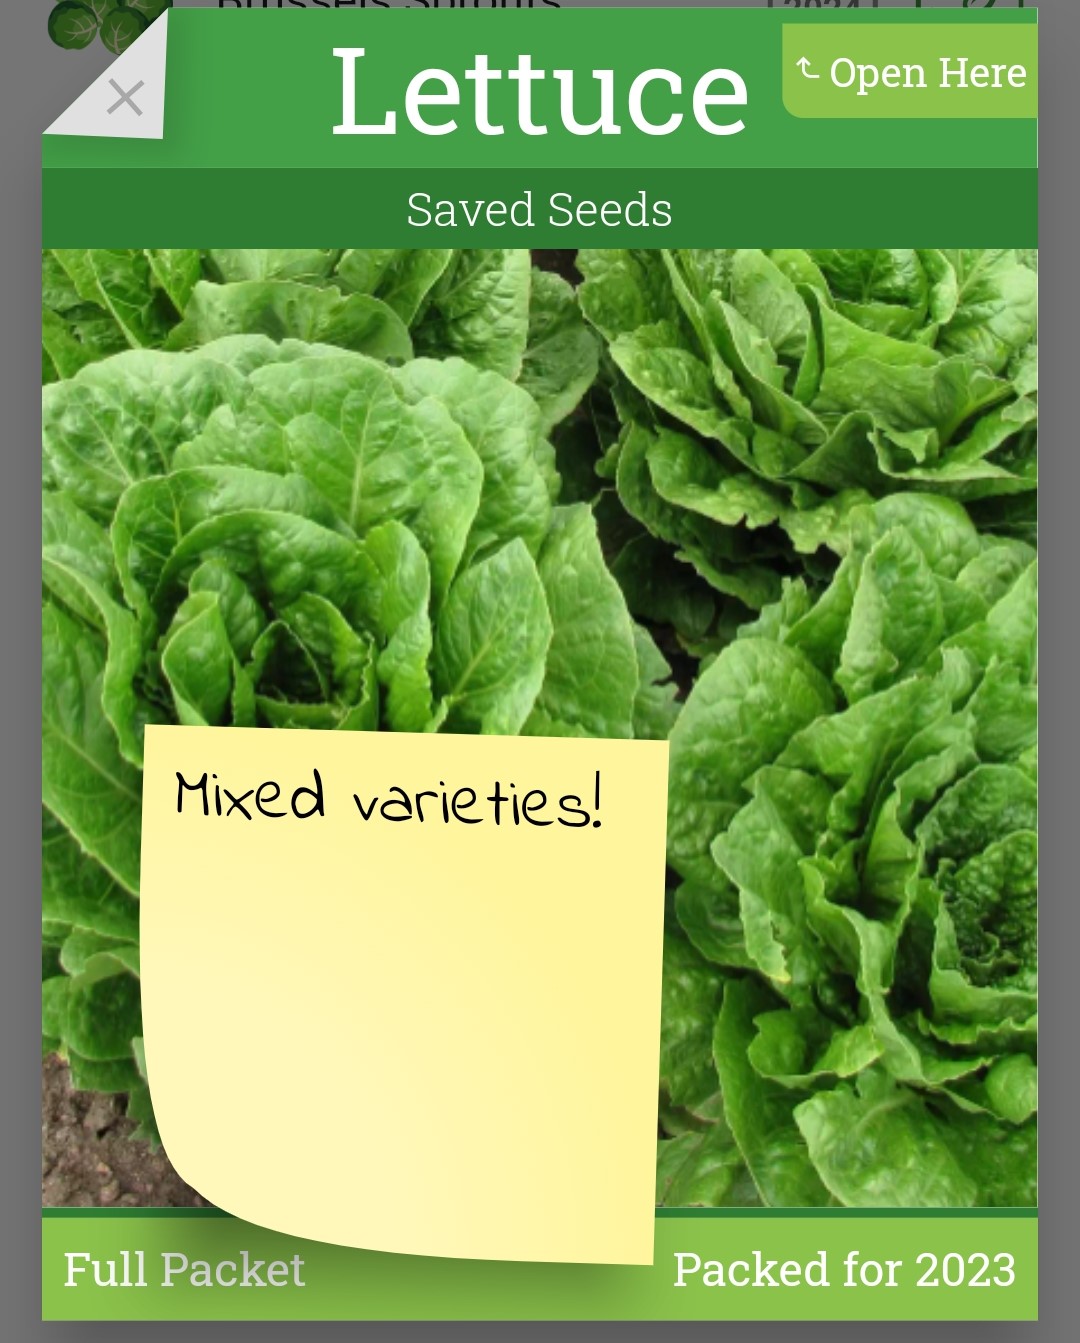 Screenshot of the seed packet view with the Open Here button